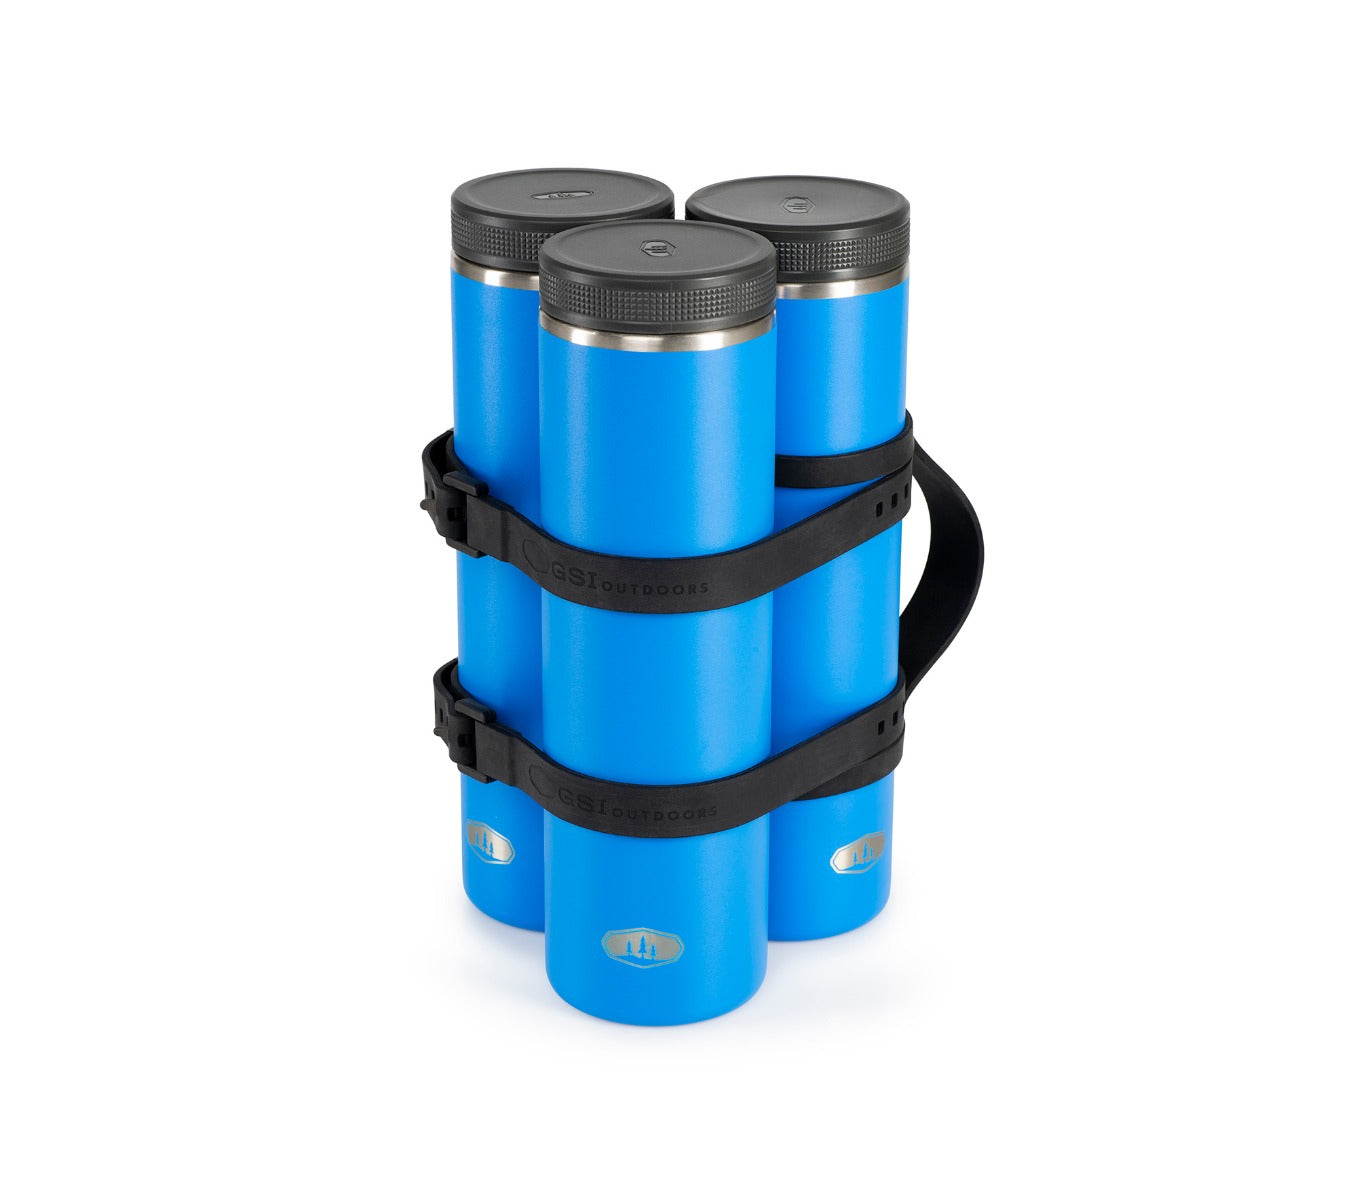 GSI's iceless cooler tube totes and serves two cans of beer in the